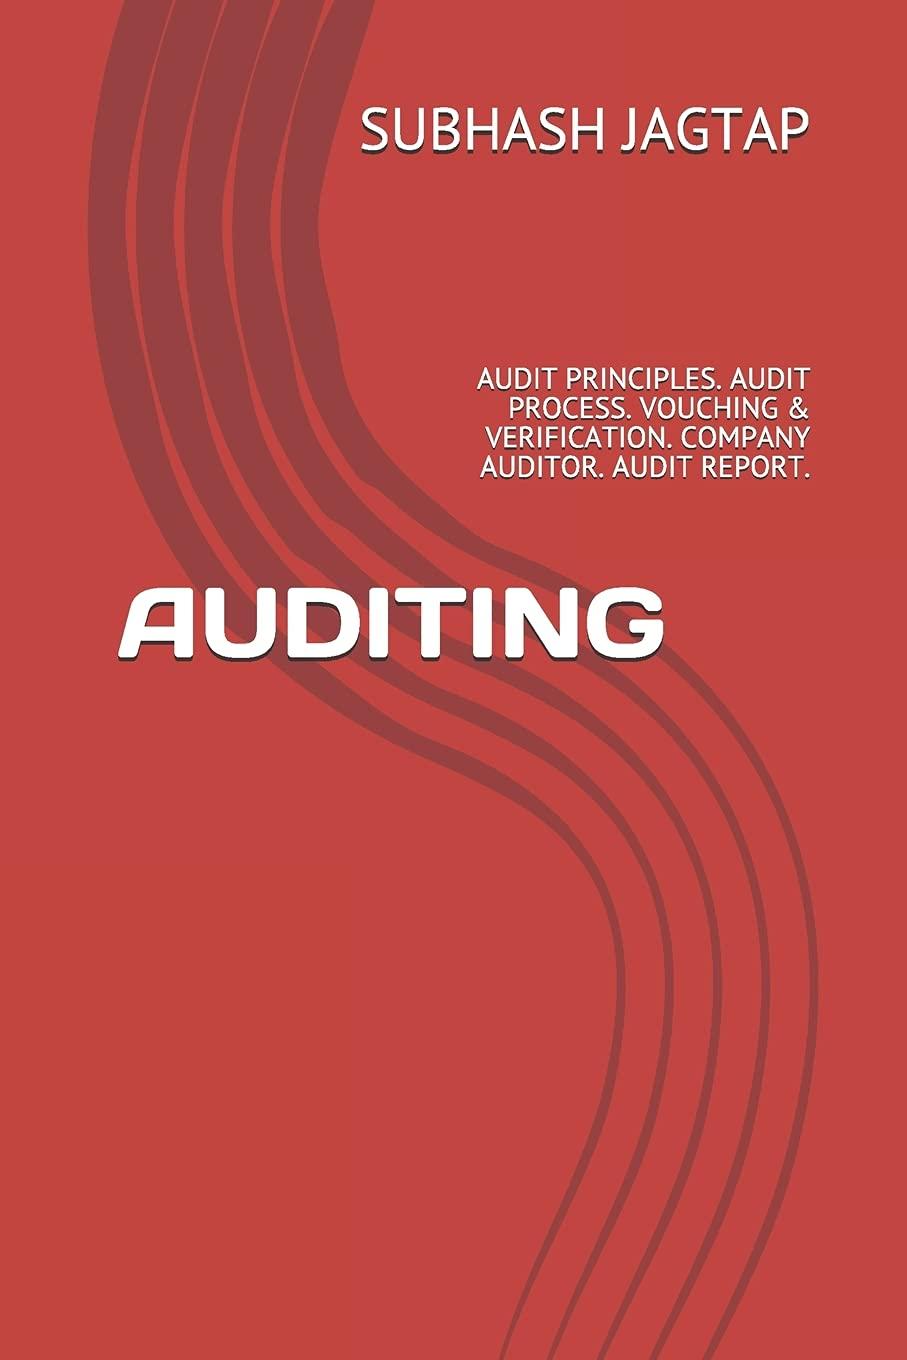 auditing audit principles audit process vouching and verification company auditor audit report. 1st edition